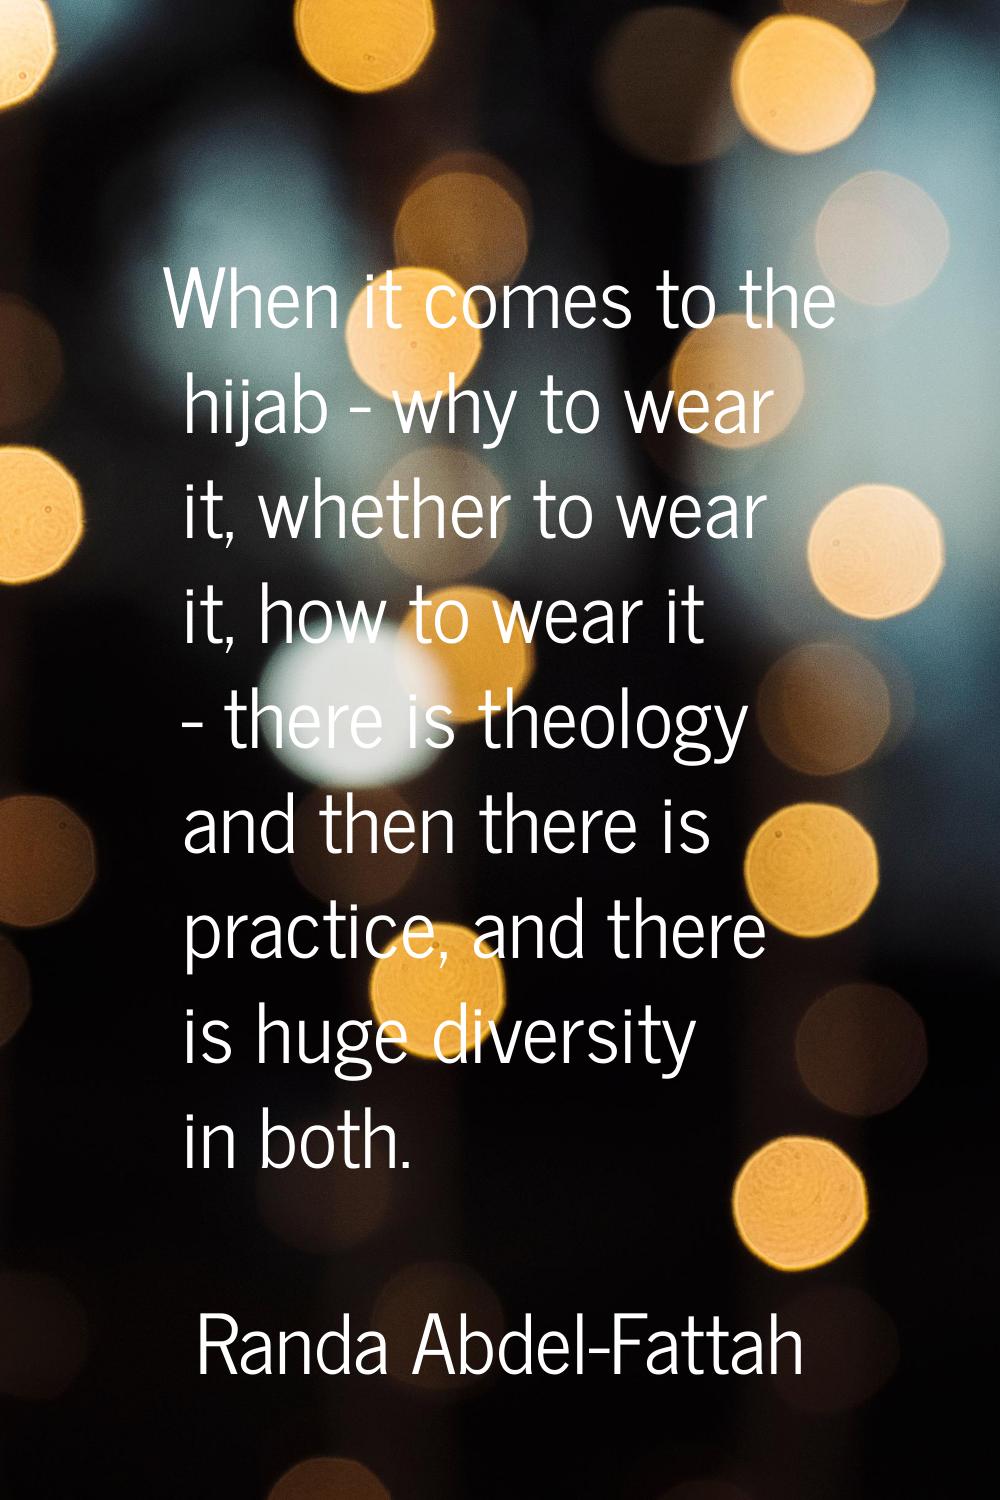 When it comes to the hijab - why to wear it, whether to wear it, how to wear it - there is theology